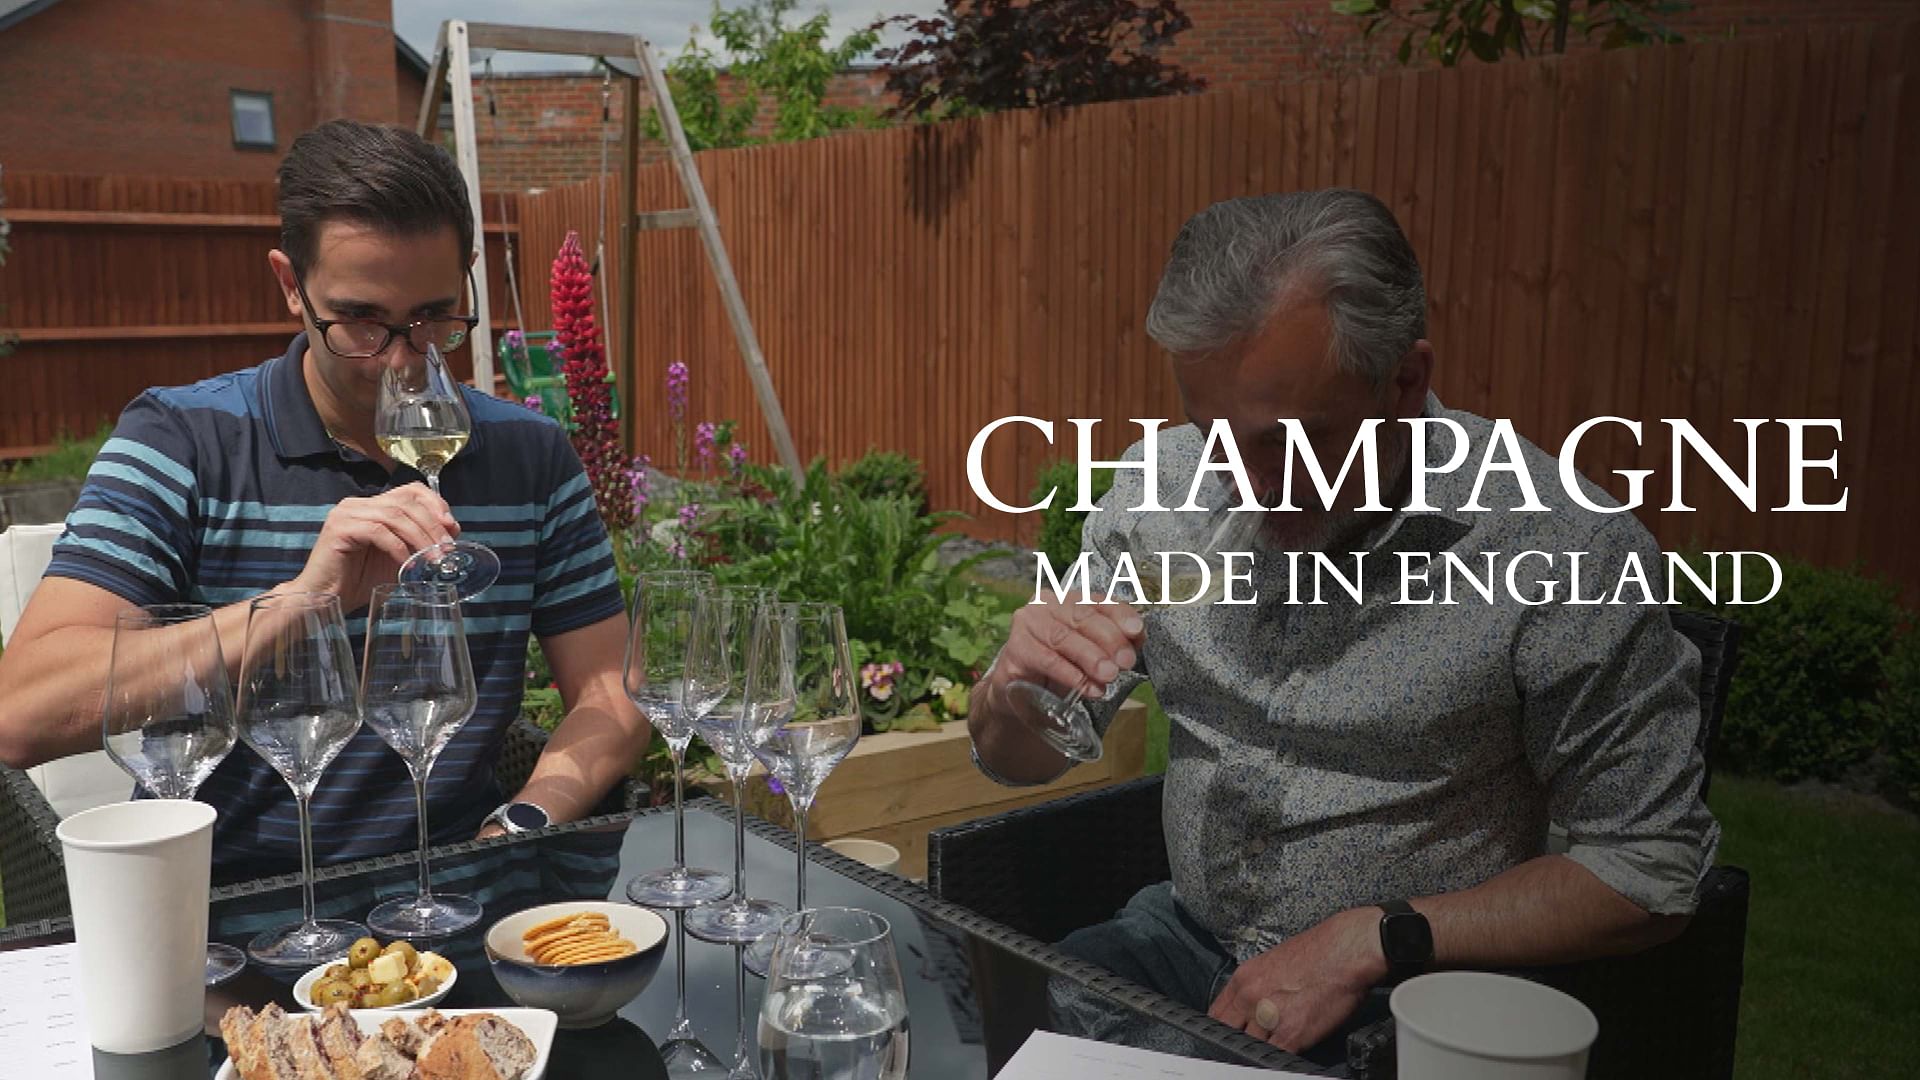 Re: Champagne made in England